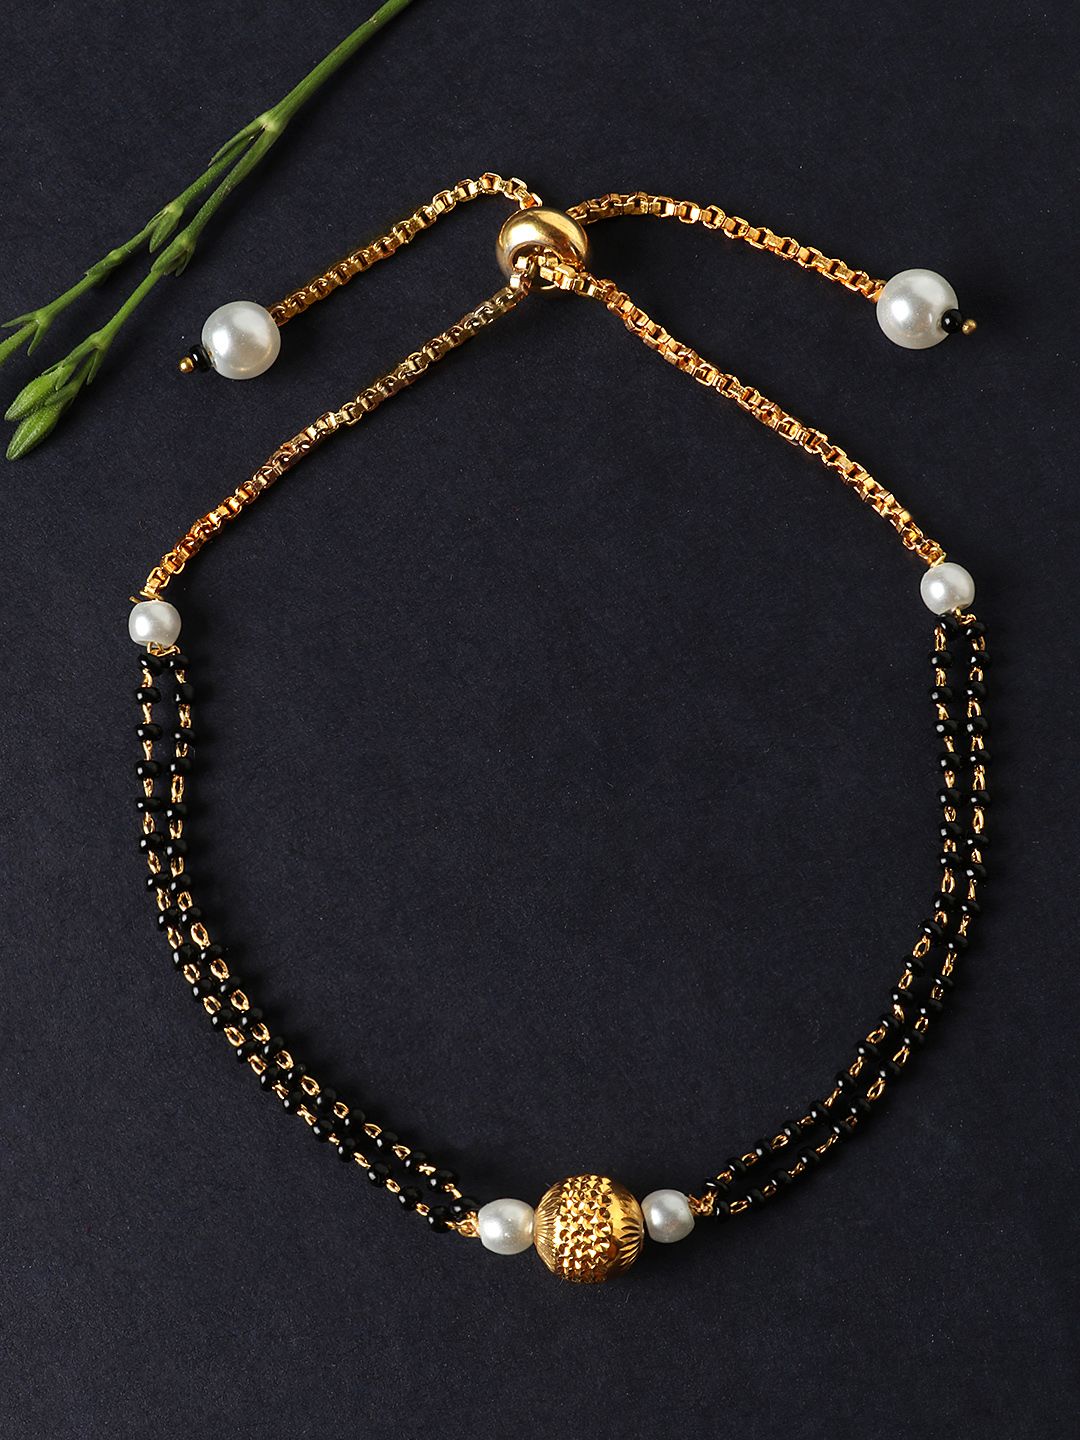 JEWELS GEHNA Black & White Gold-Plated Beaded Mangalsutra Bracelet Price in India